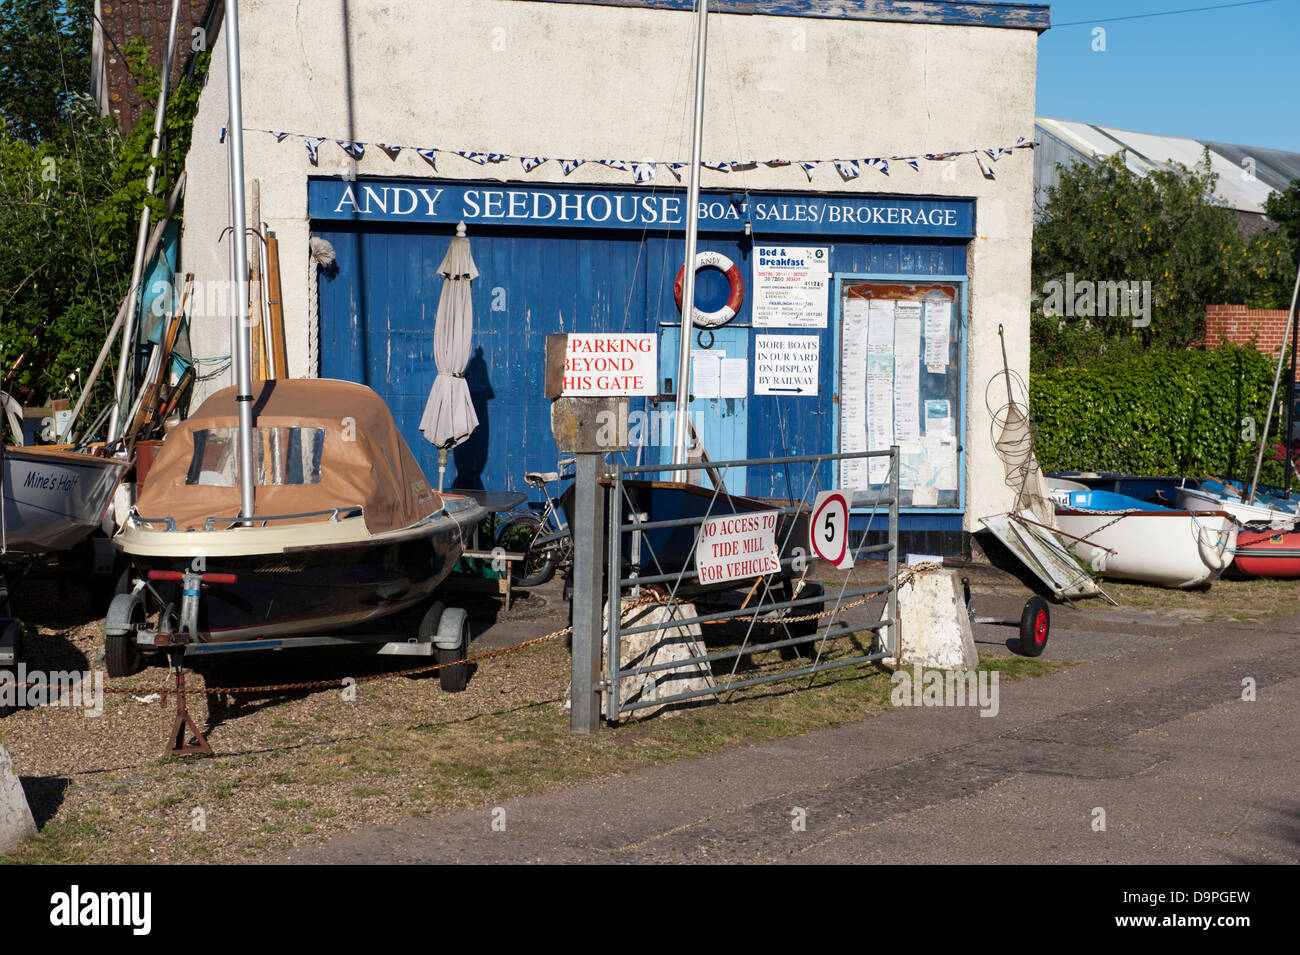 Traditional boat sales and brokerage office at Ferry Quay, Woodbridge, Suffolk, UK Stock Photo